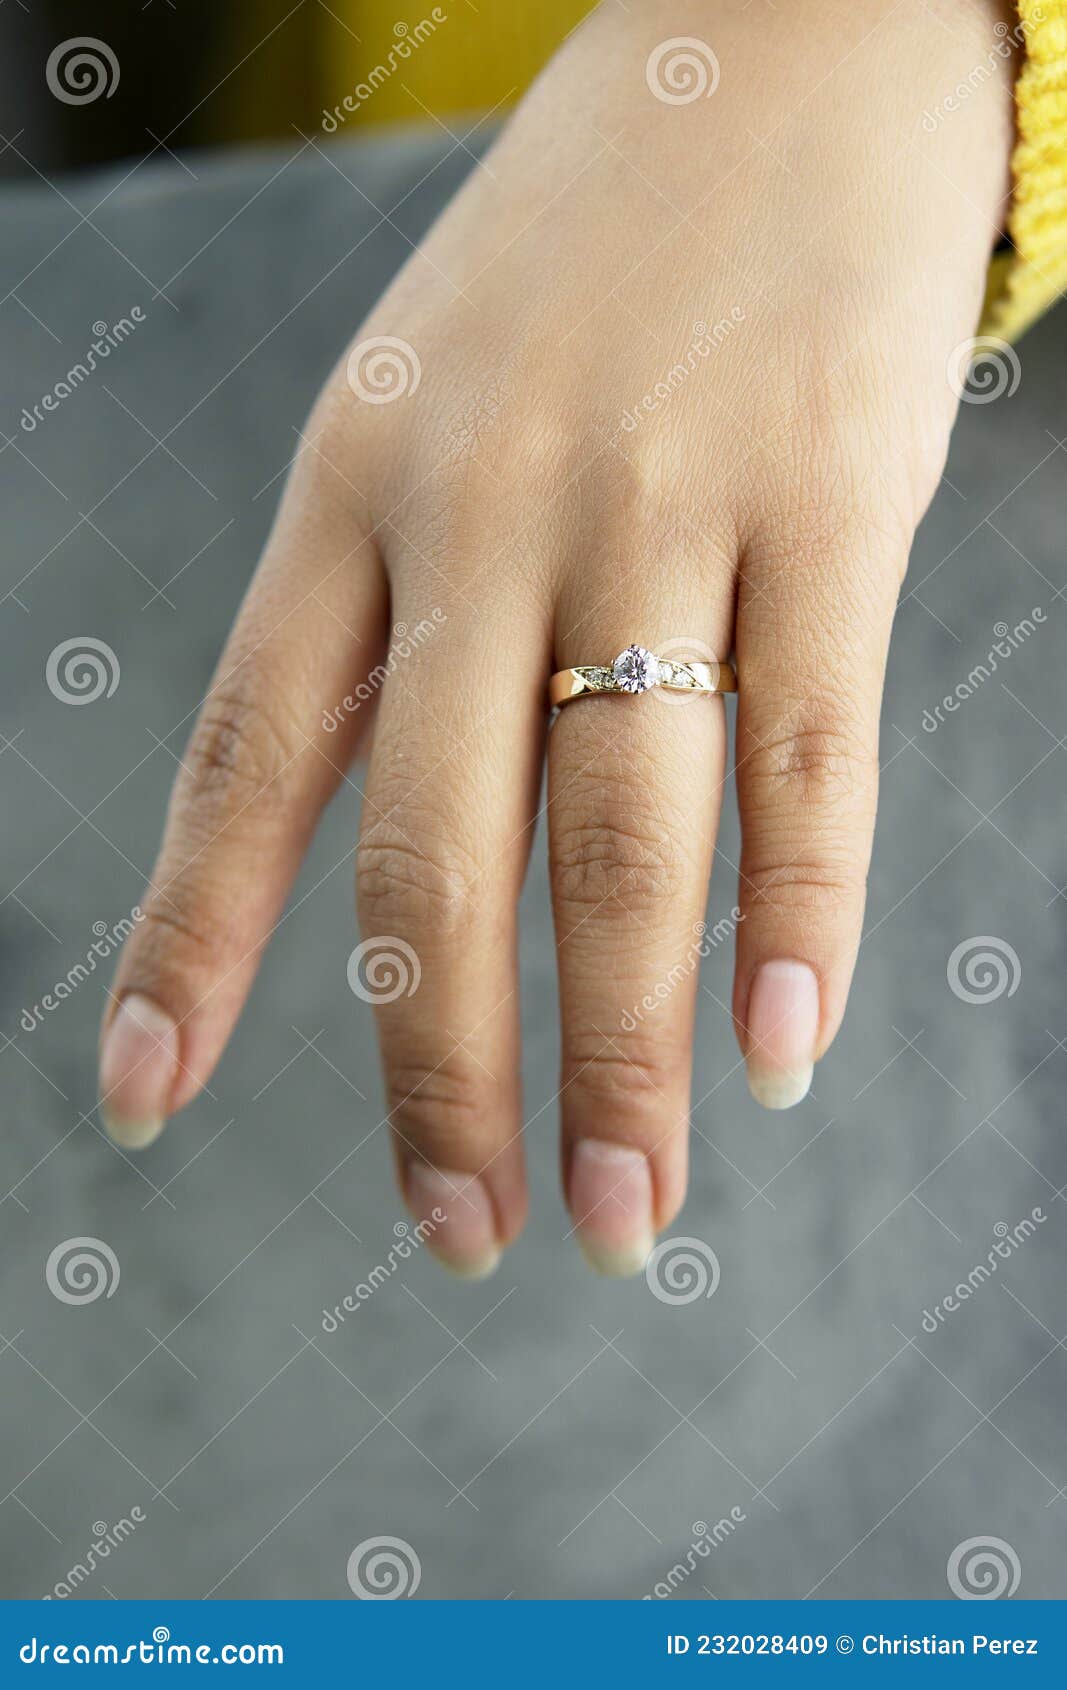 Hand of a Girl with Gold Rings Stock Image - Image of nail, jeans: 52256733